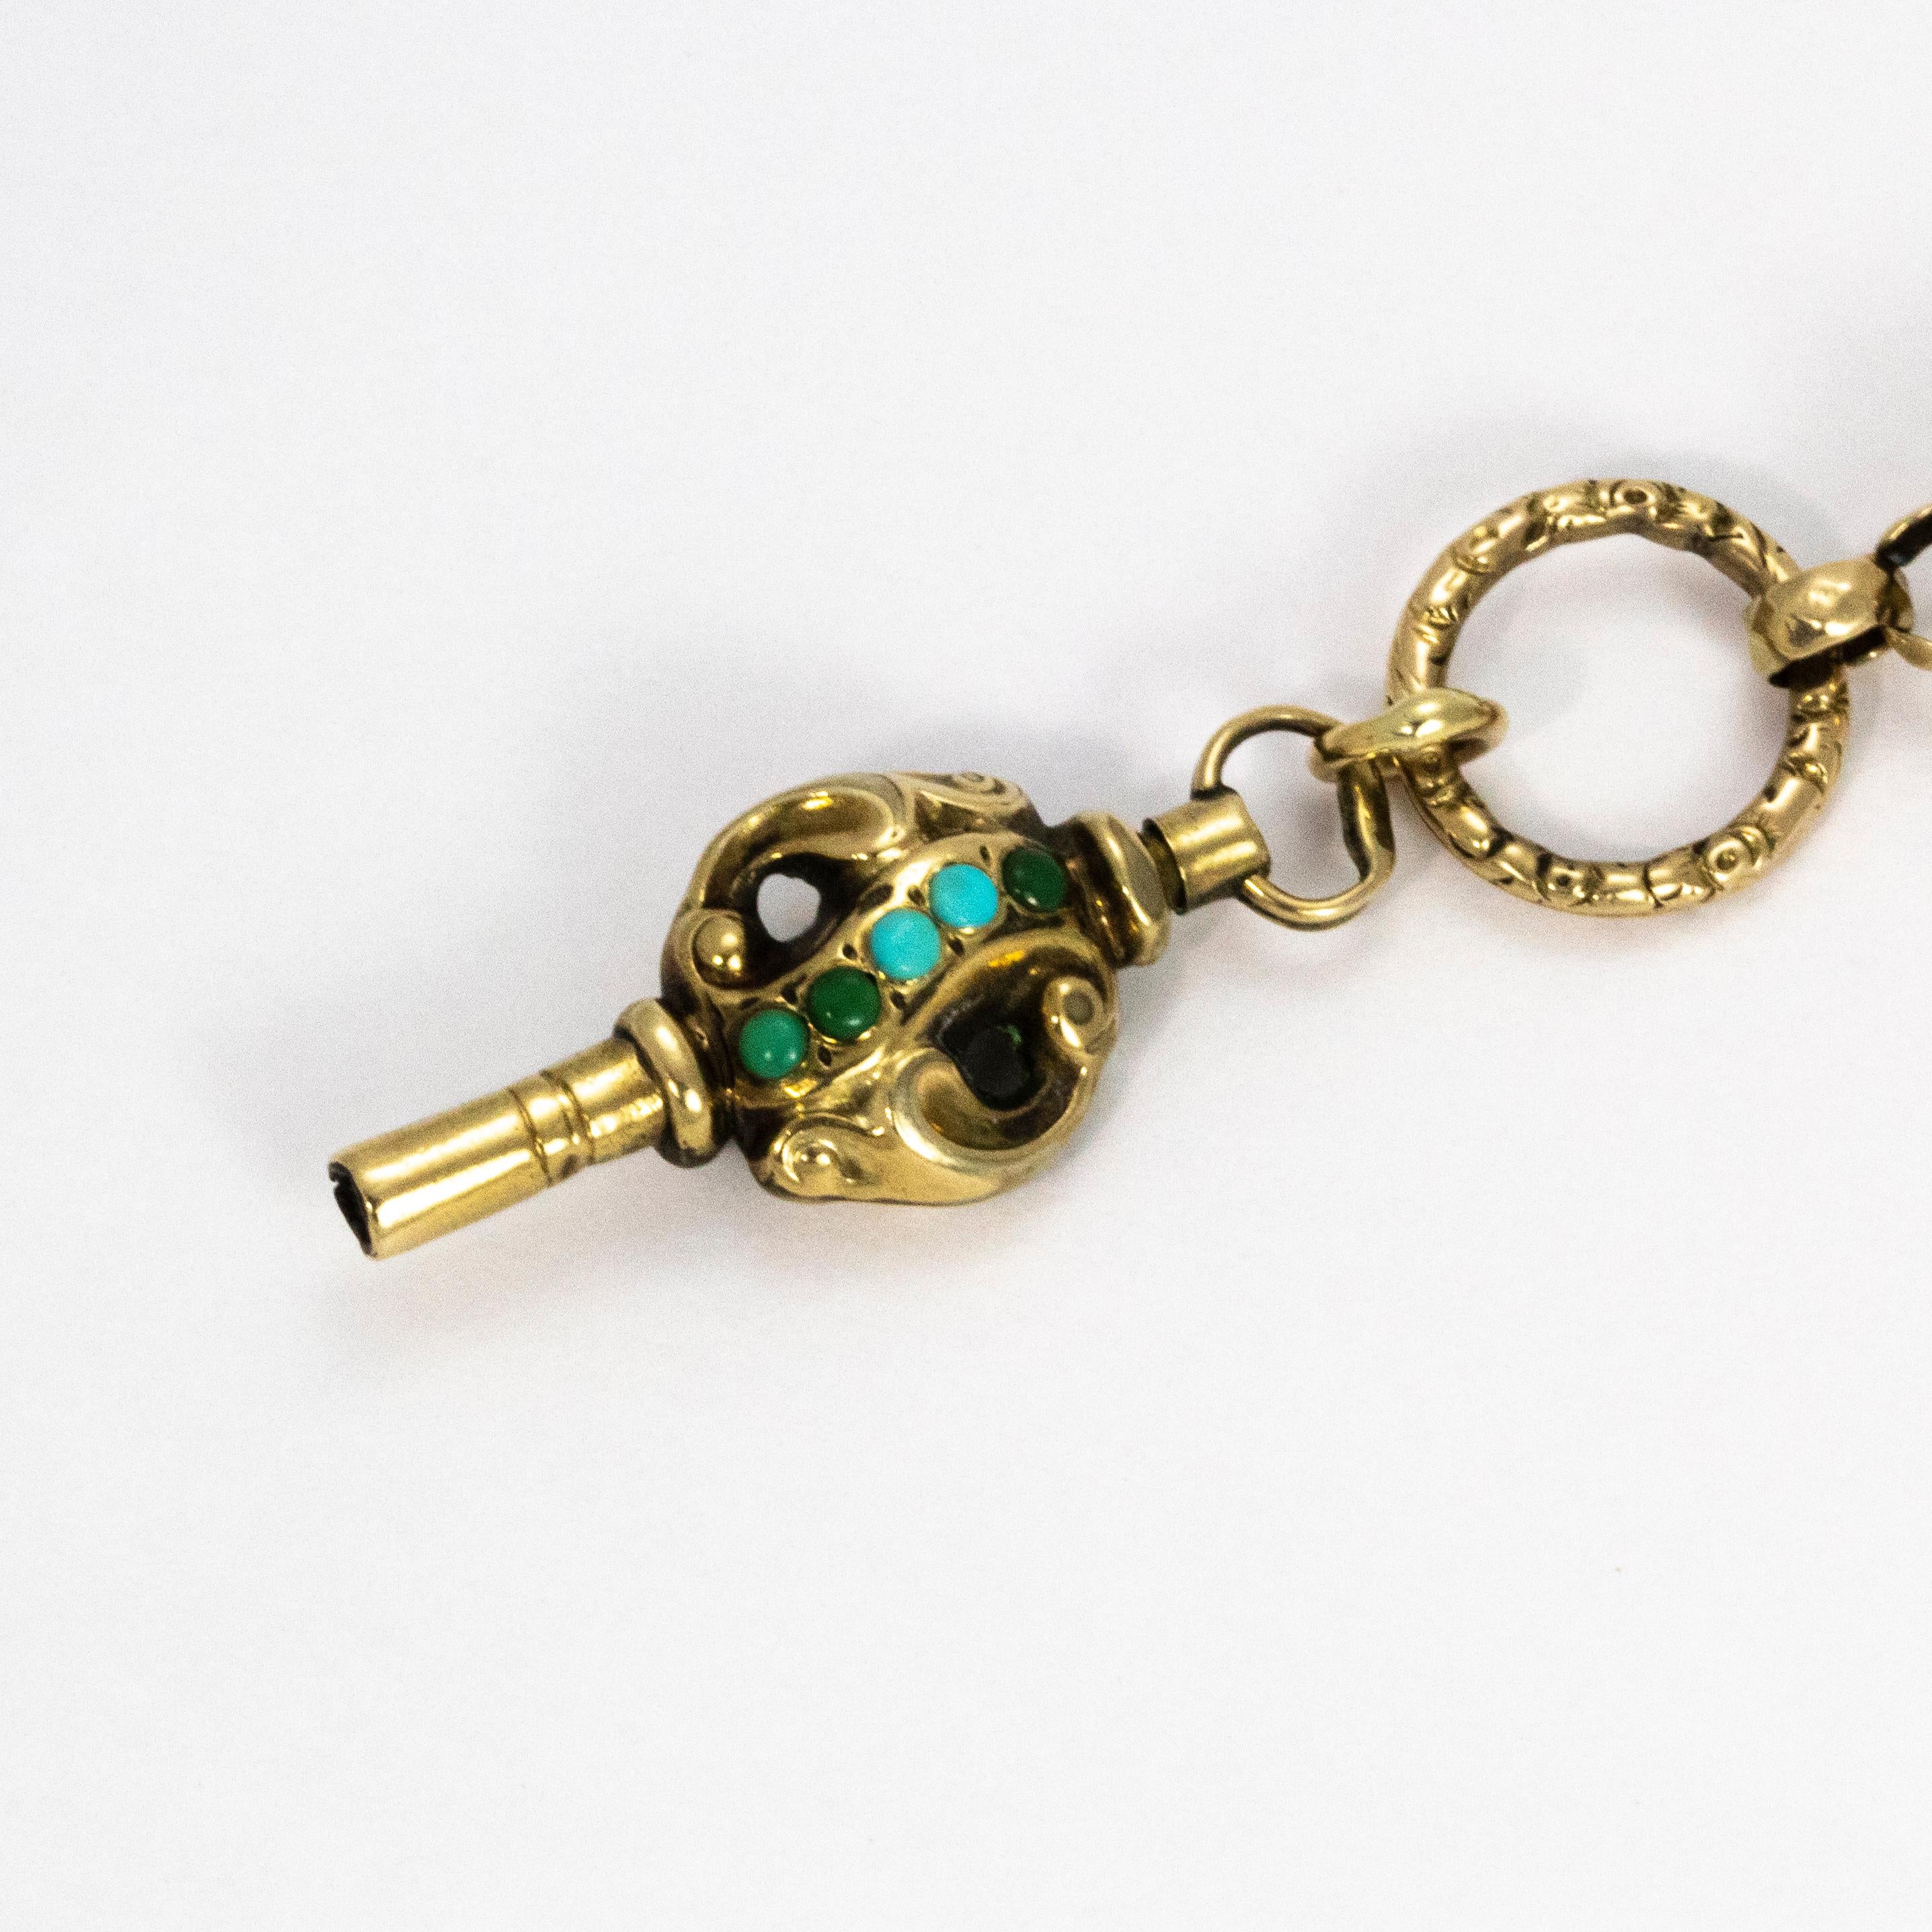 Victorian Chatelaine Chain with Turquoise and 9 Carat Gold 1